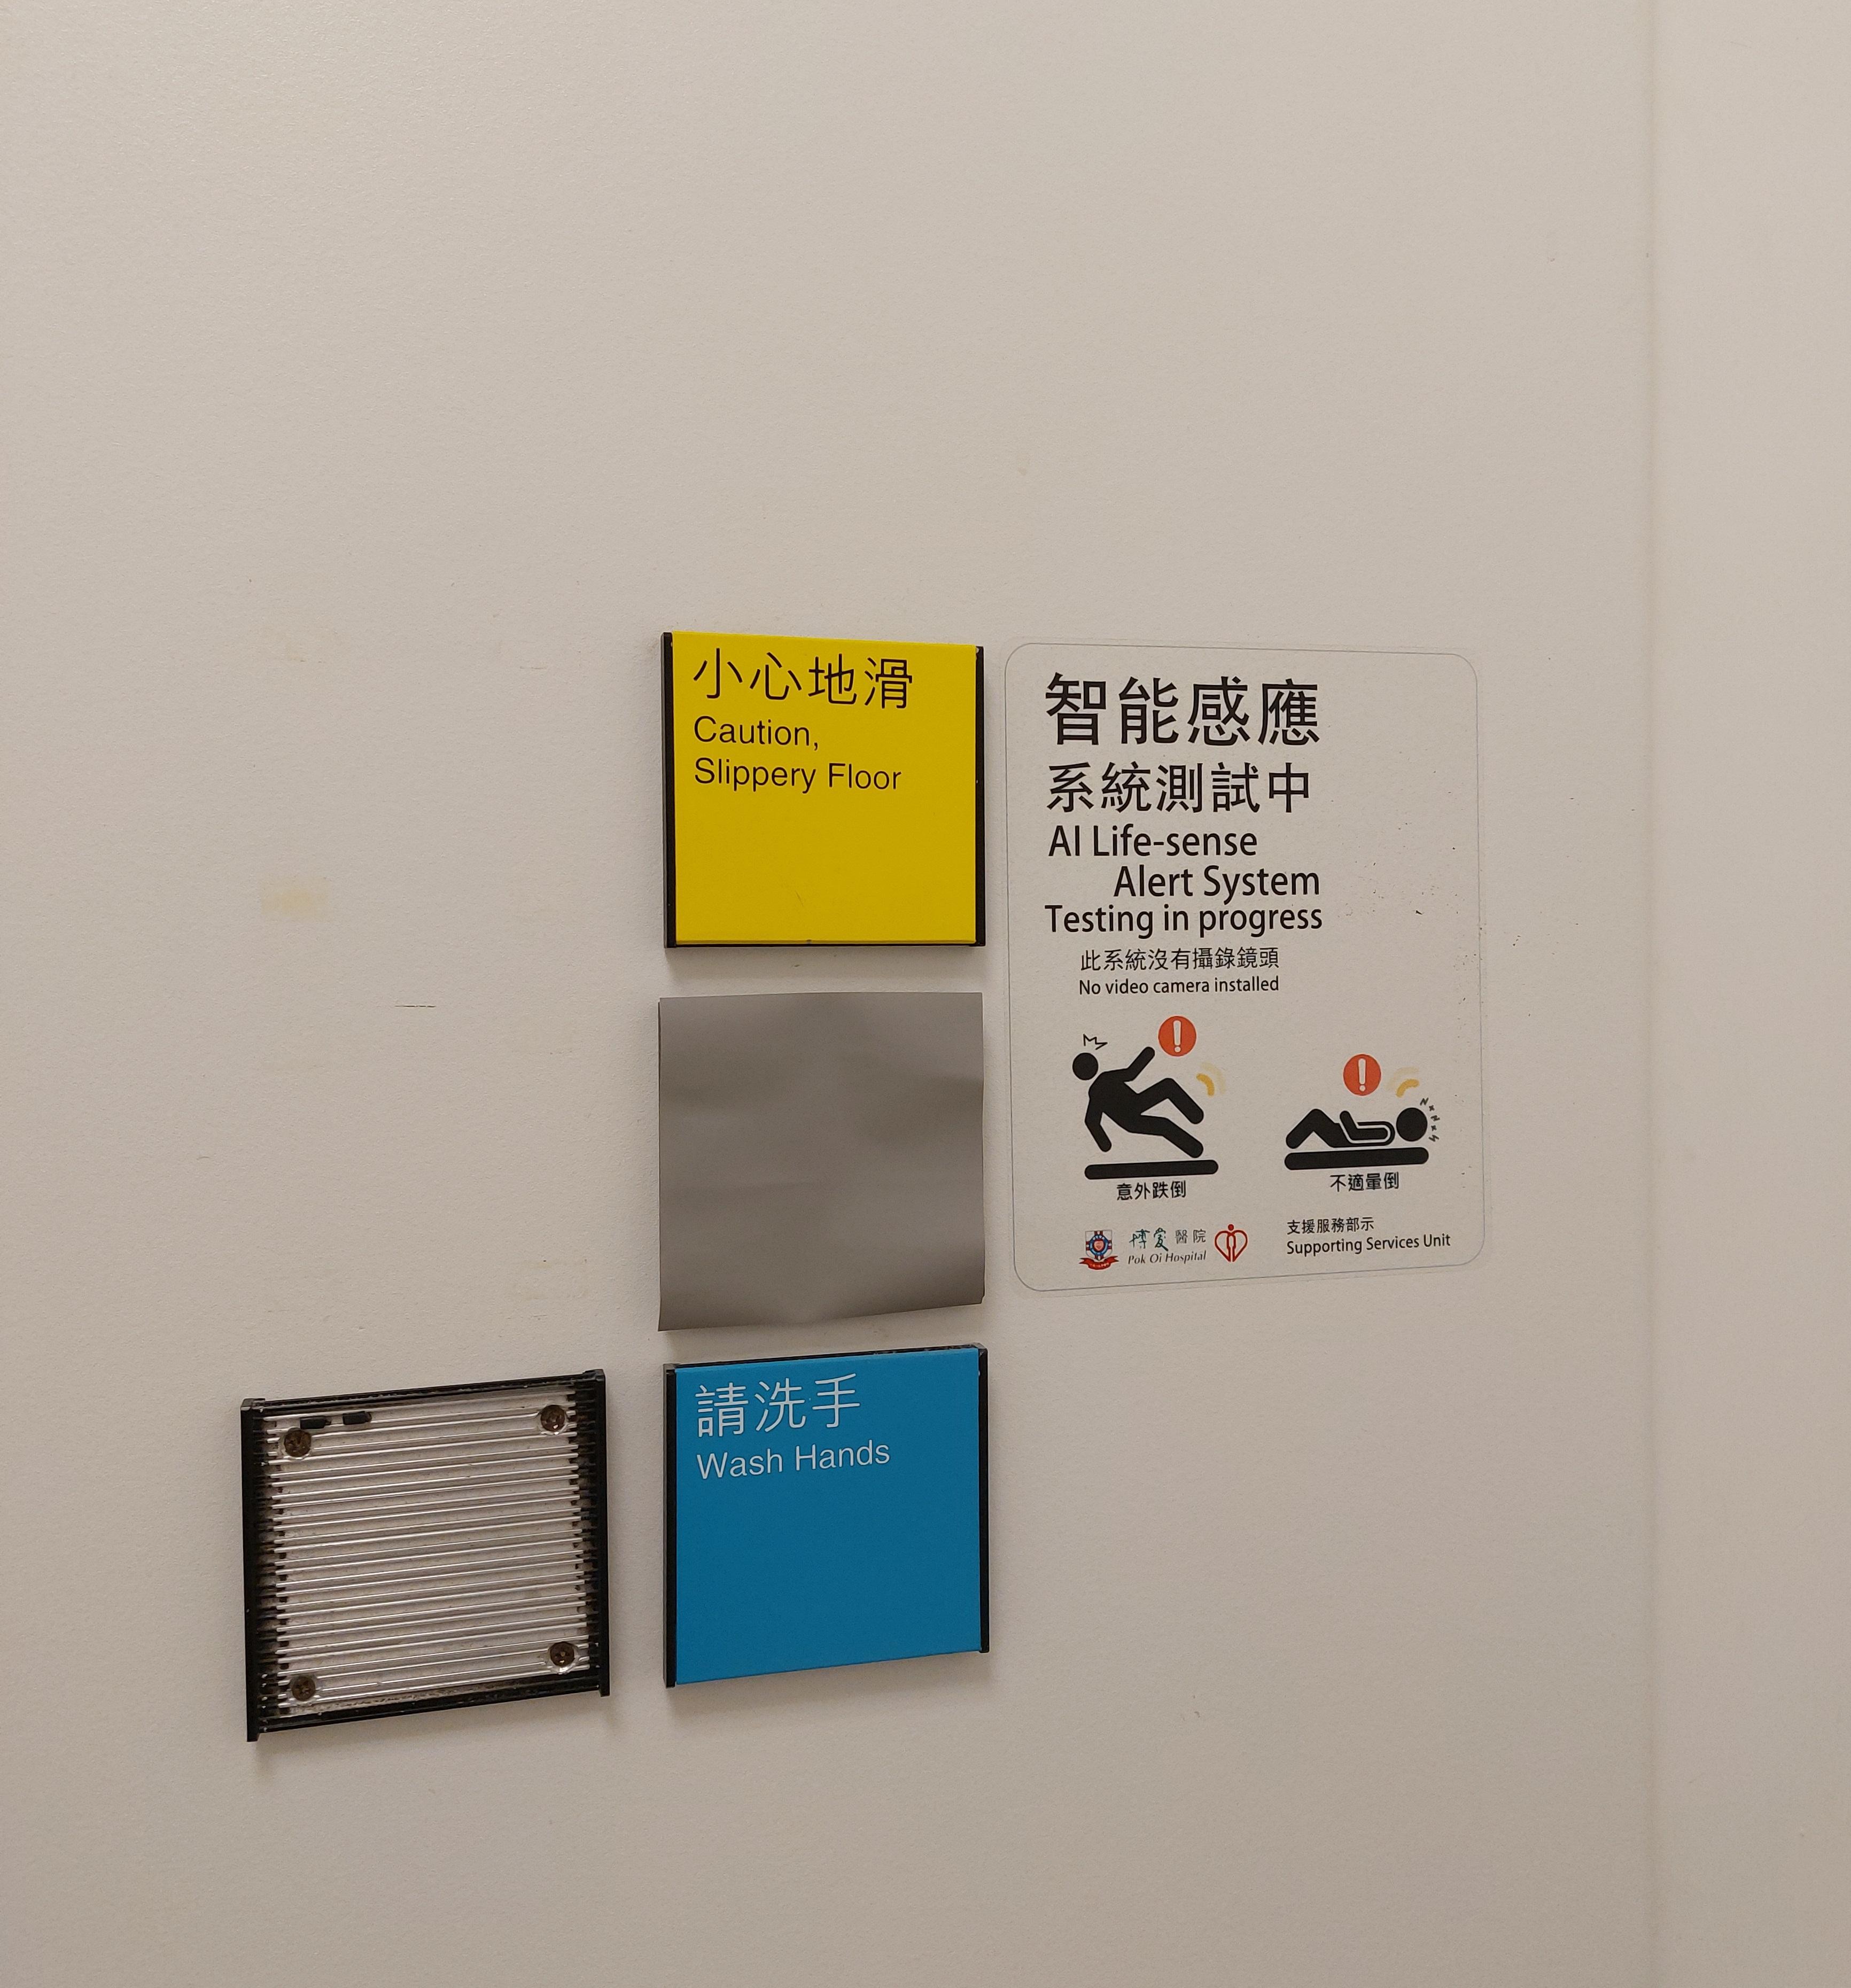 The Hospital Authority has installed sensor systems in some accessible toilets of accident and emergency departments on a trial basis to enhance patient safety.
